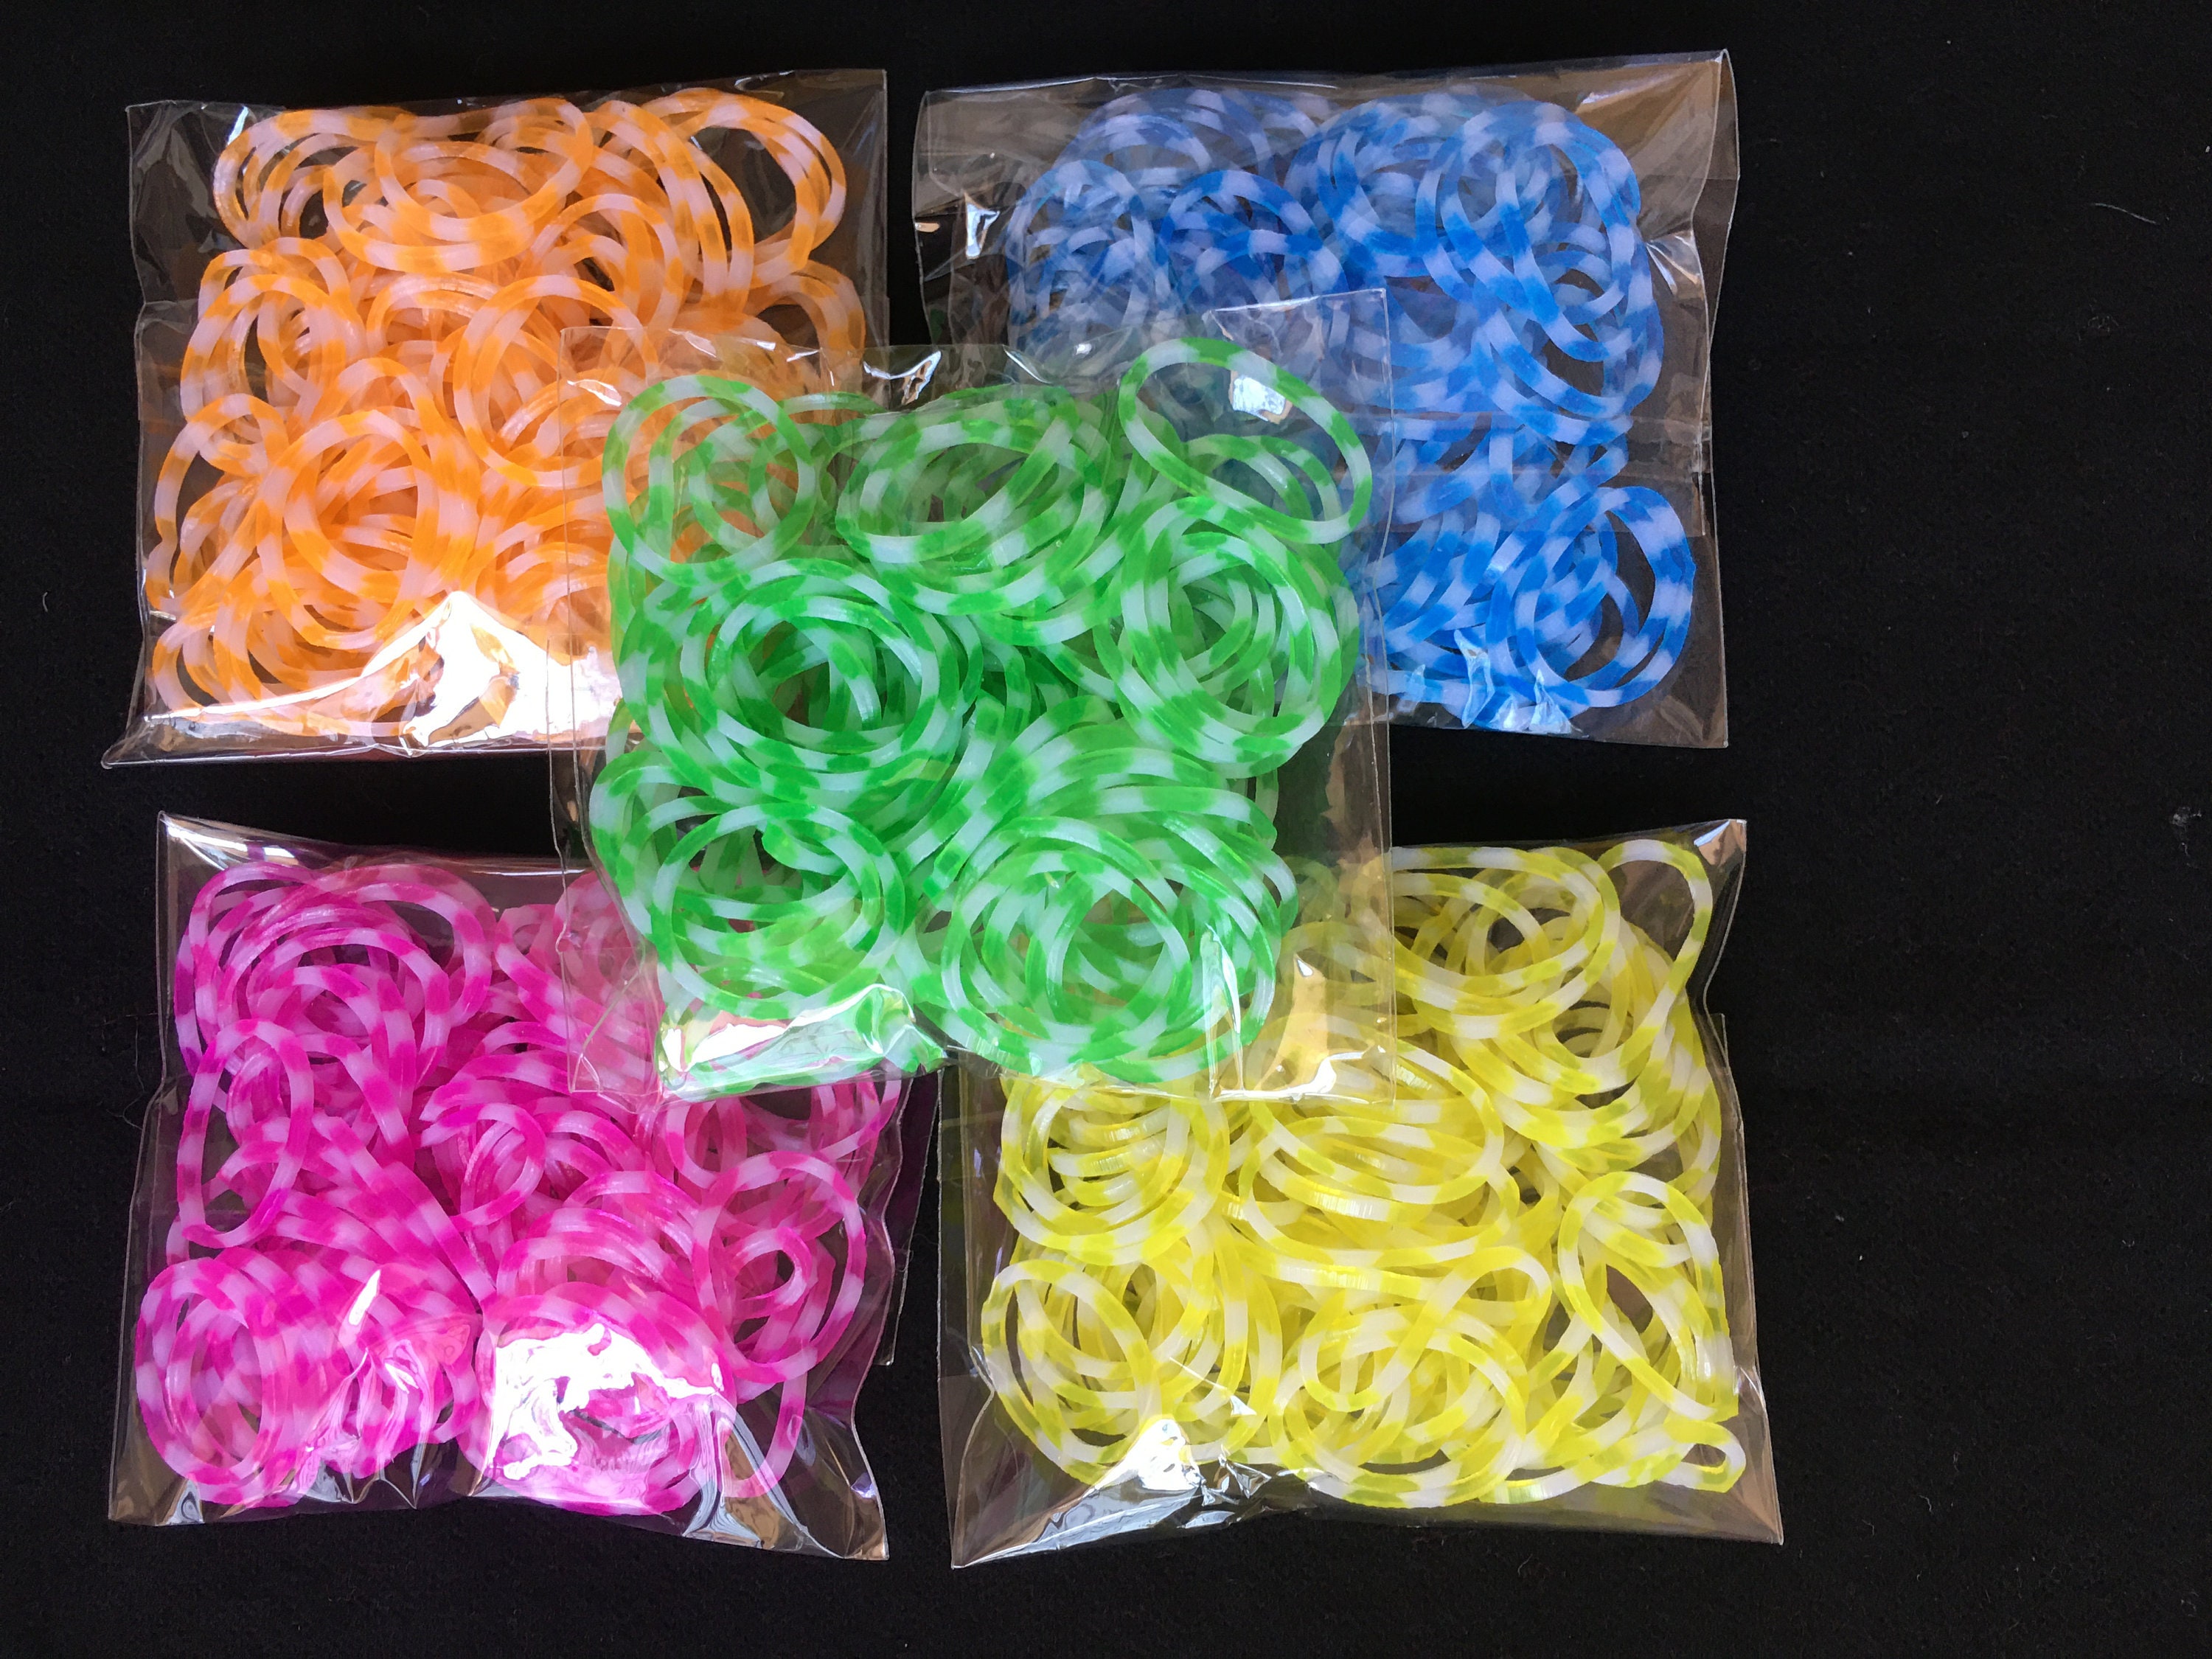 WIVOWI Loom 5200+ Rubber Bands Refill Loom Set: 8 Colors Glow in The Dark 5000 Loom Bands,200 Colored S-Clips,10 Charms,1 Upgrade Crochet Hook for